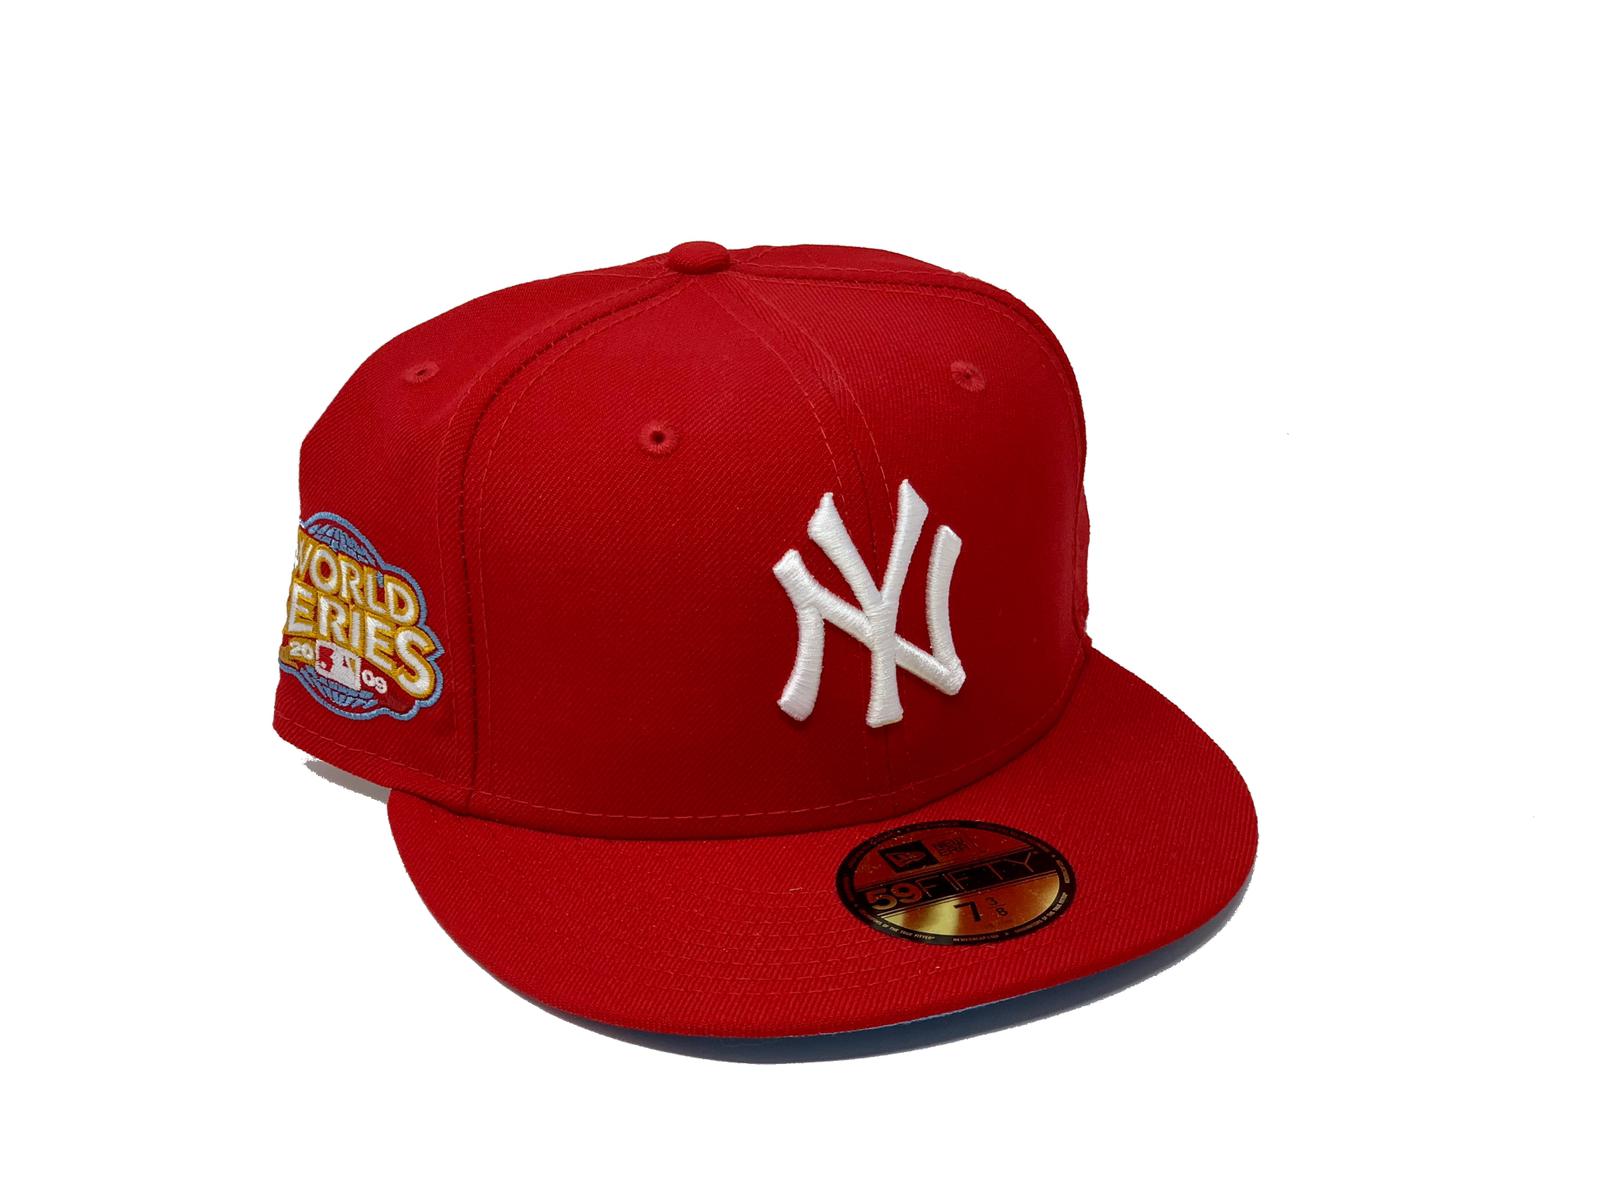 Nwt Polo Ralph Lauren Red Yankees Fitted Hat